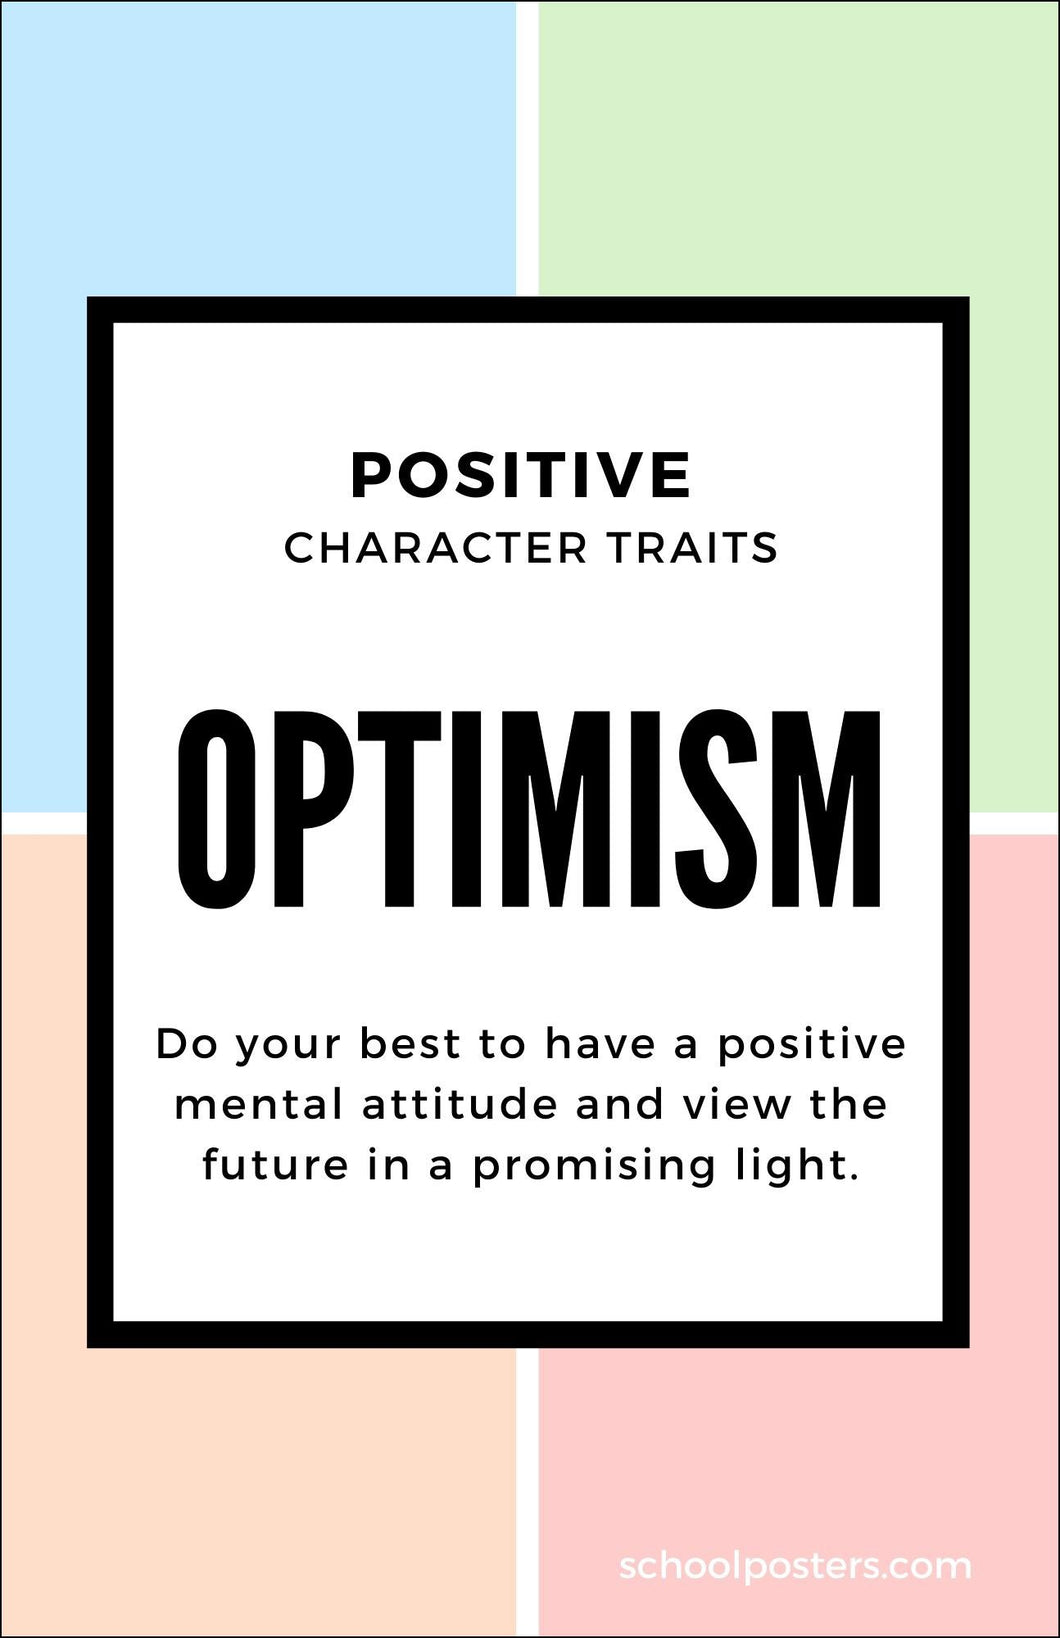 Character Optimism Poster